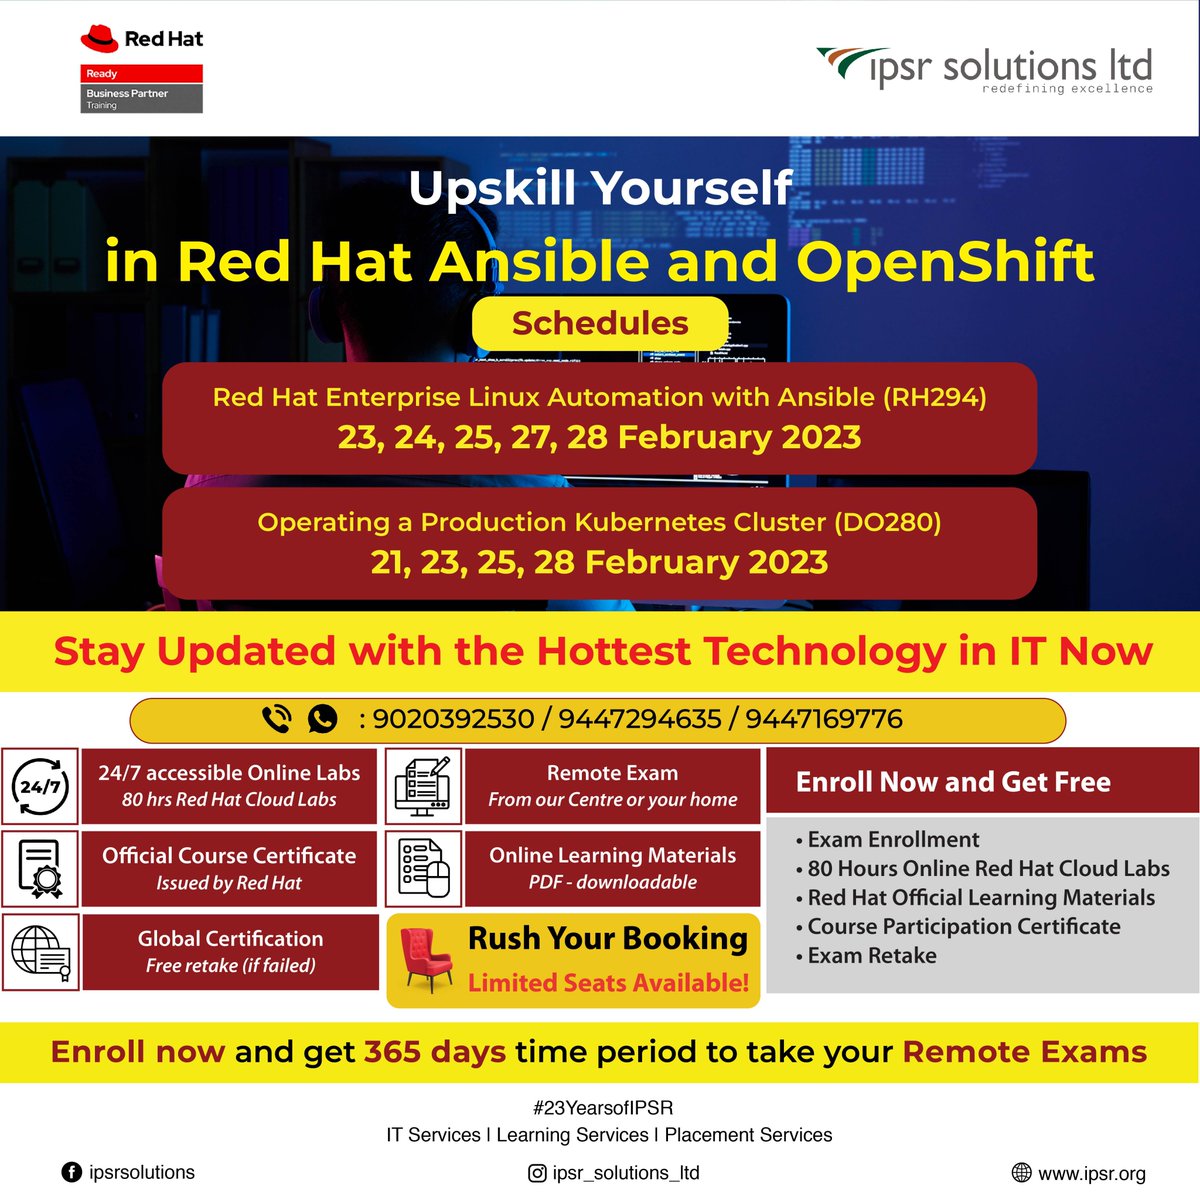 Upskill Yourself in Red Hat Ansible and OpenShift with #RH294 and #DO280 !
Contact : sigin.george@ipsrsolutions.com
Call / WhatsApp : +91 90203 92530
for more details.
#redhatcertification #redhatopenshift #ansible #ansibleautomates #ansibleautomation